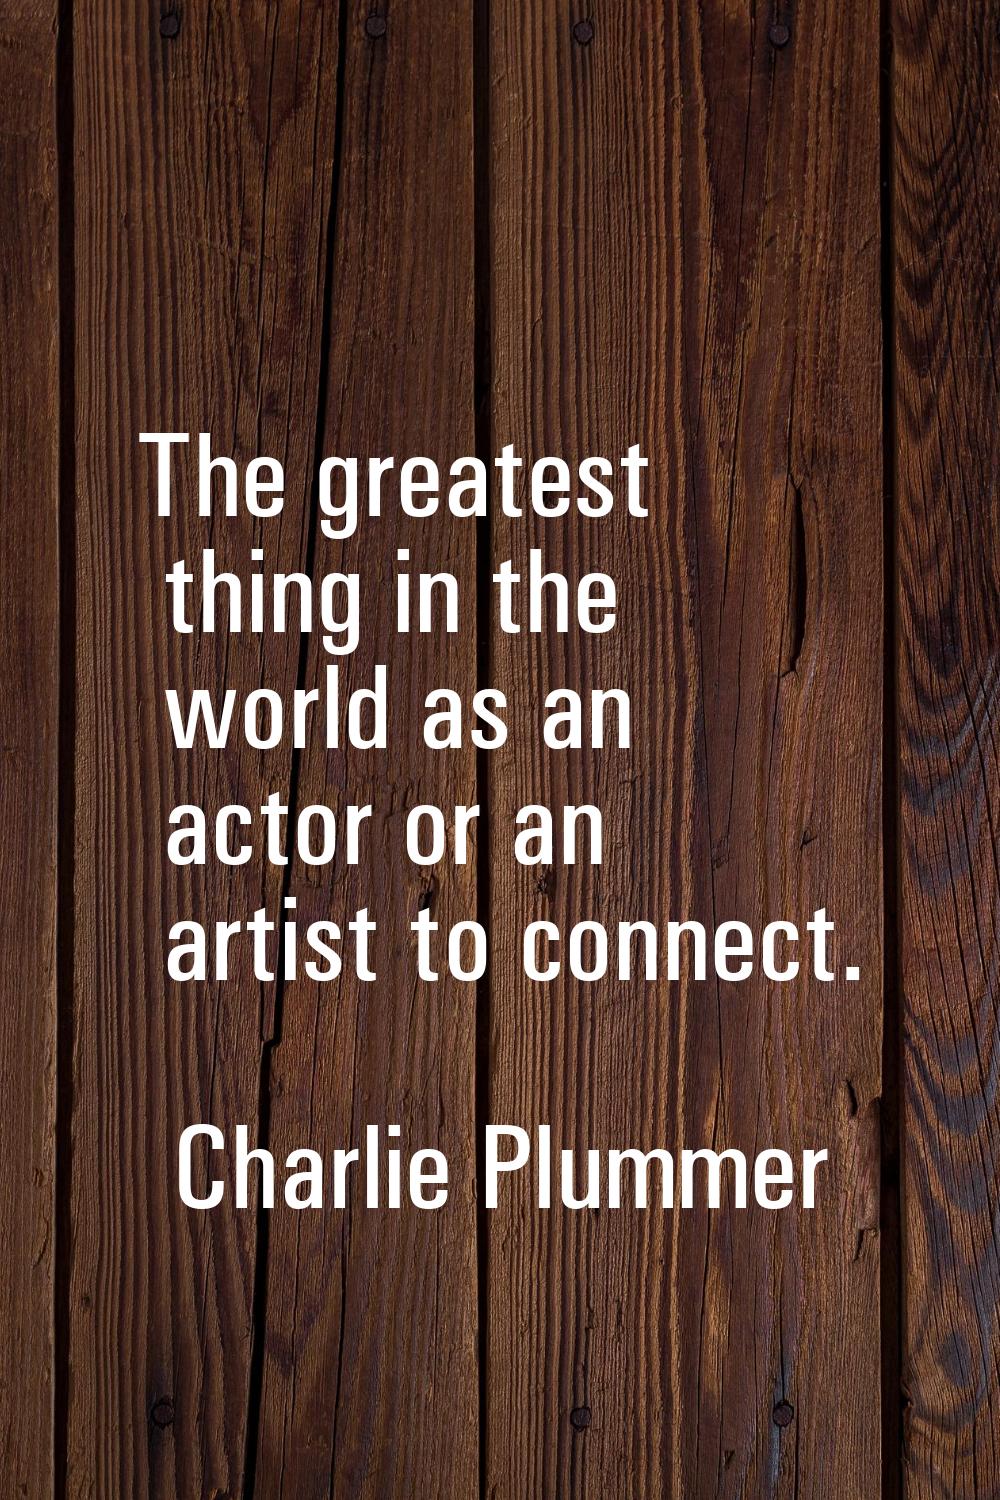 The greatest thing in the world as an actor or an artist to connect.